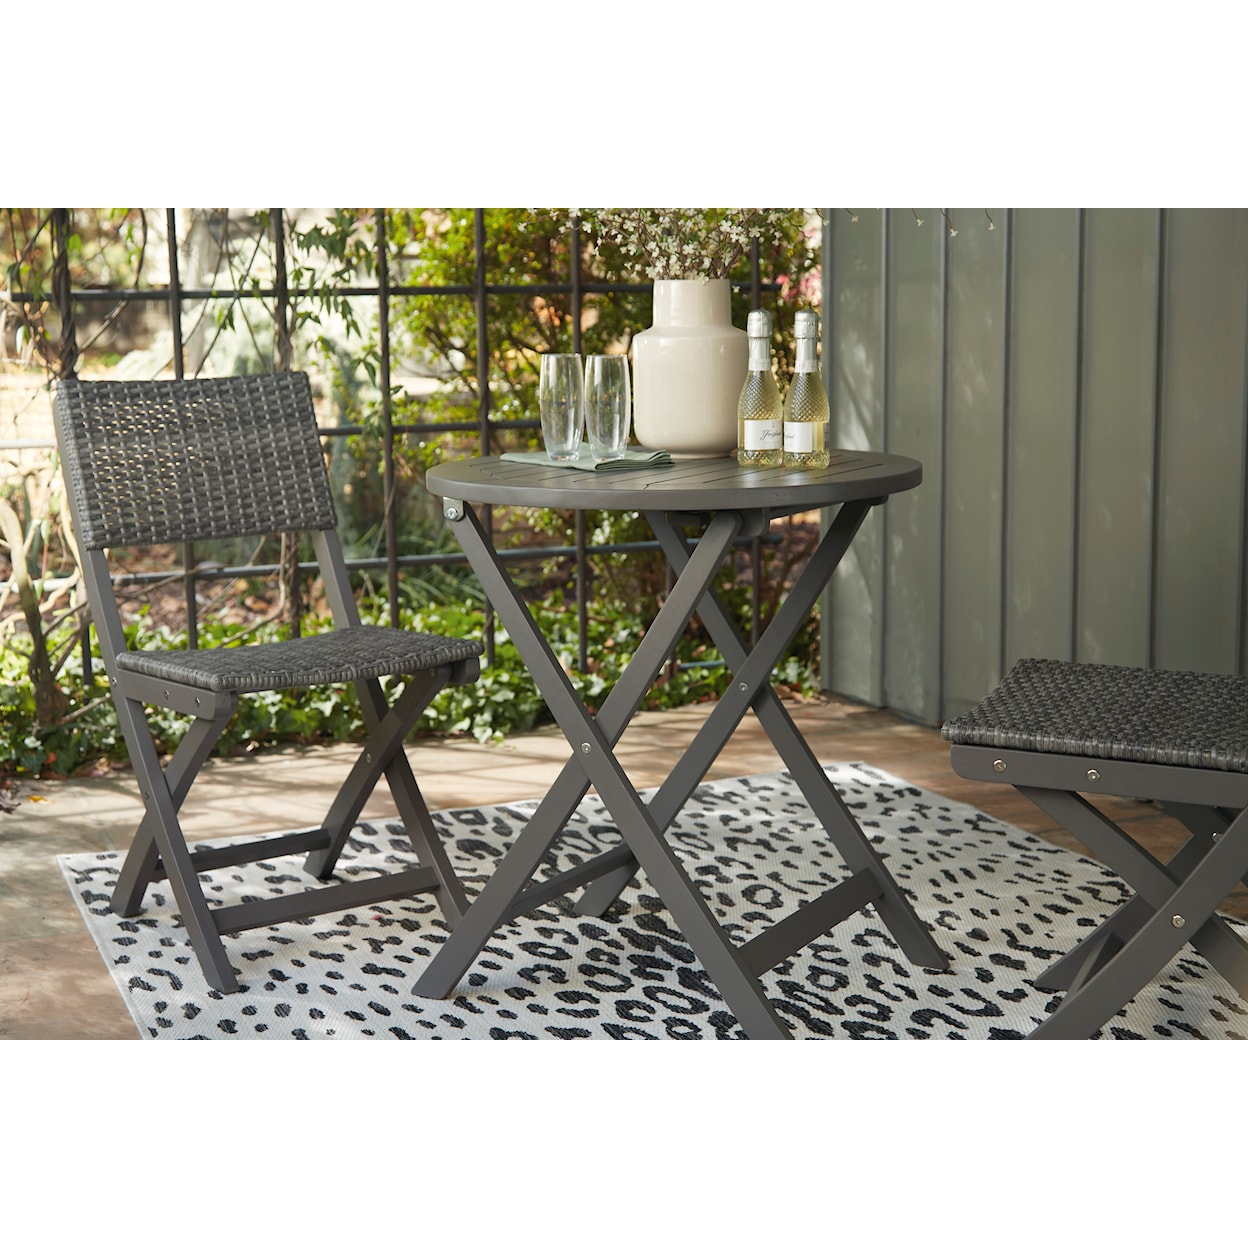 Benchcraft Safari Peak Outdoor Table and Chairs (Set of 3)